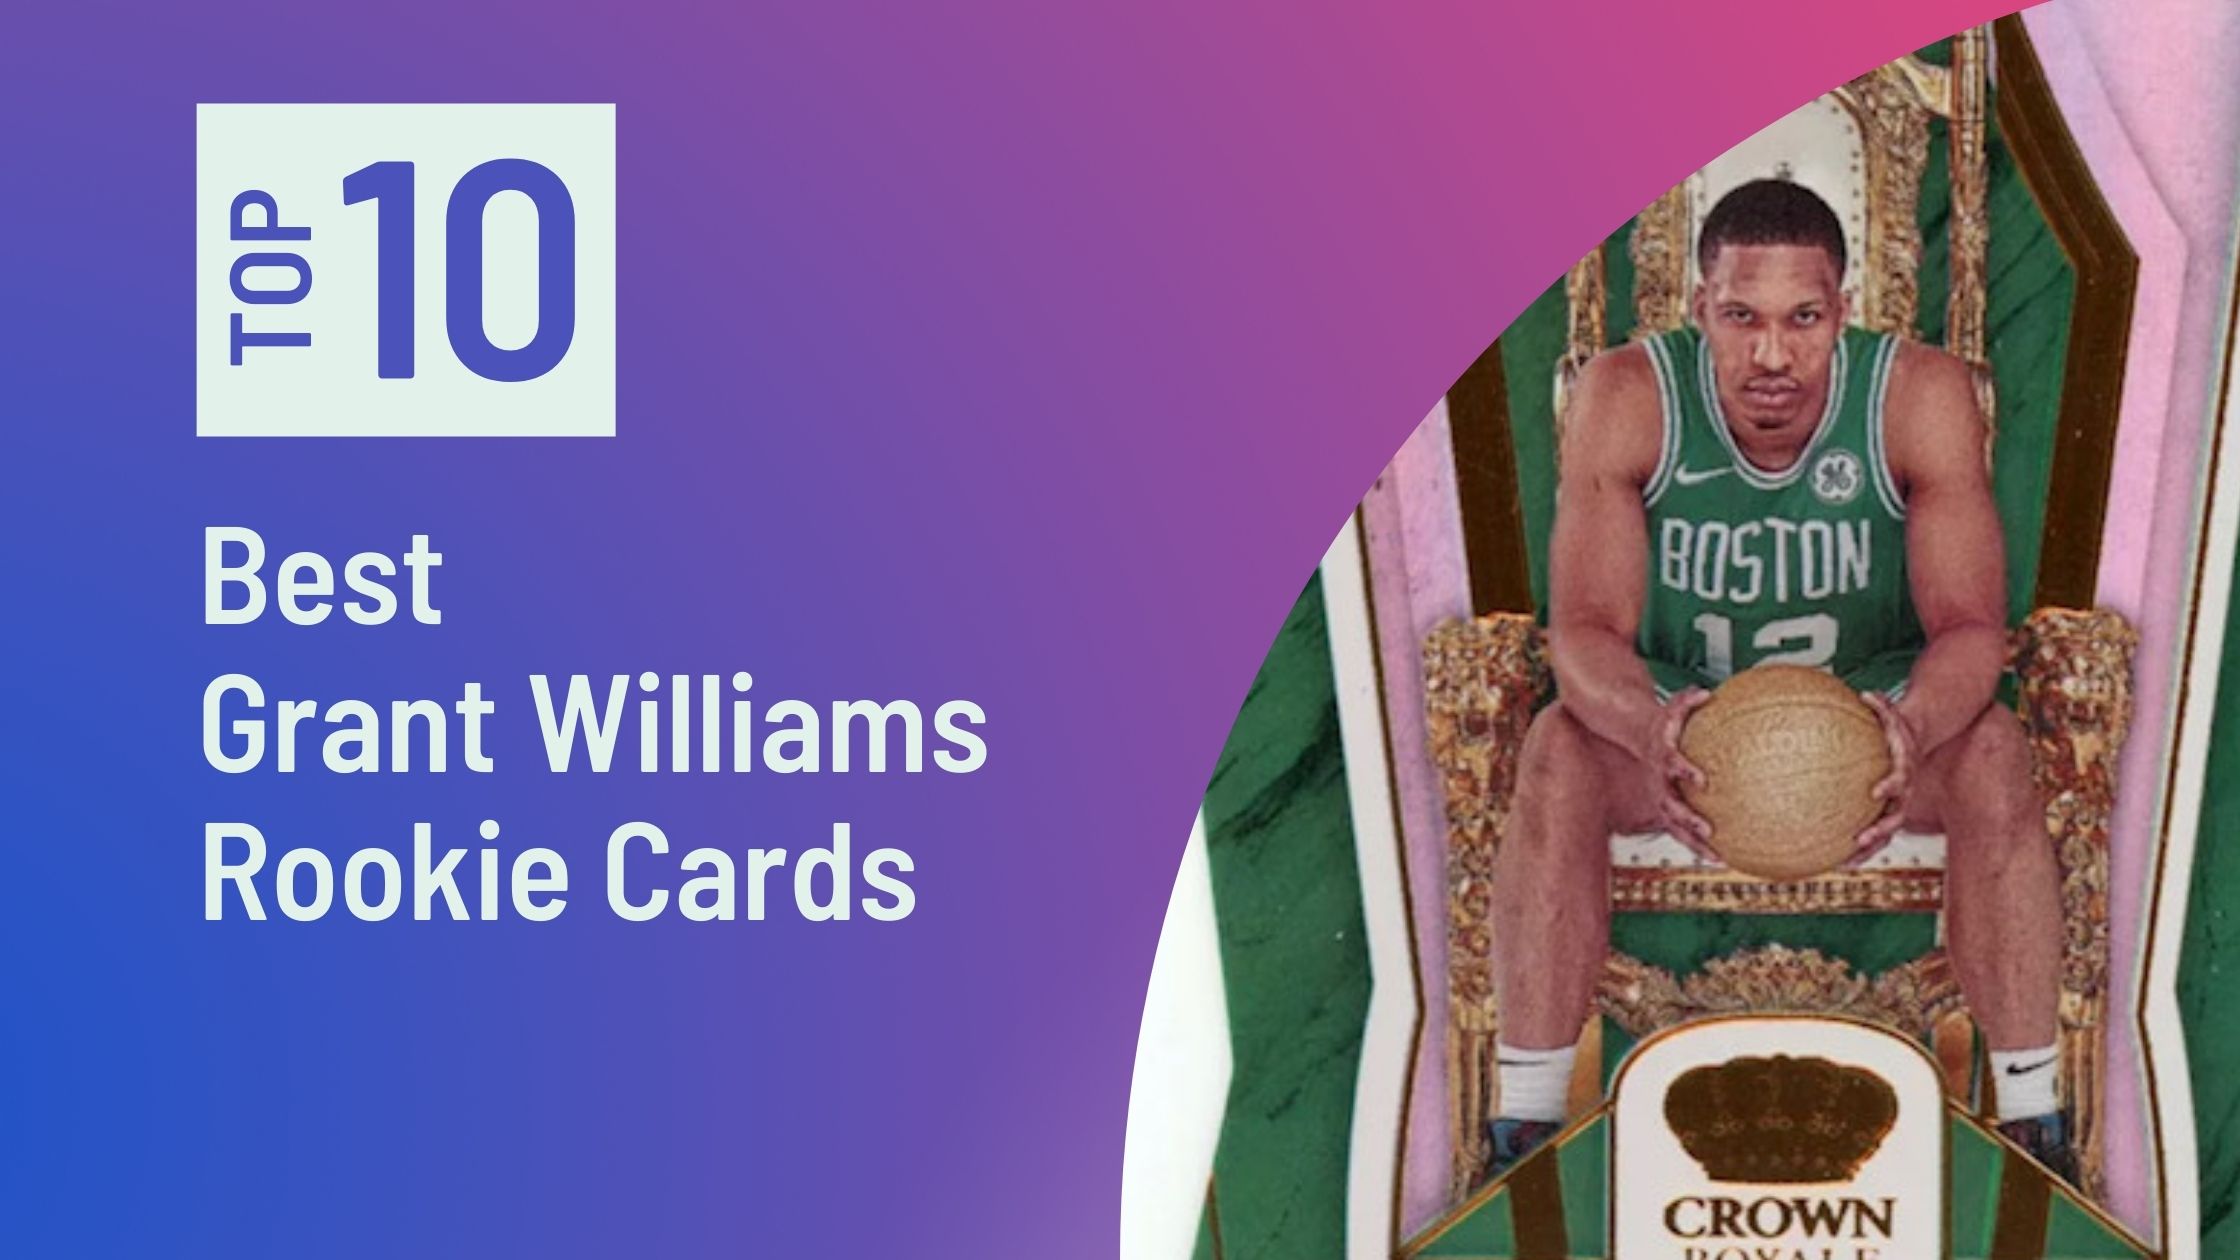 Featured Image for the Best Grant Williams Rookie Cards blog post